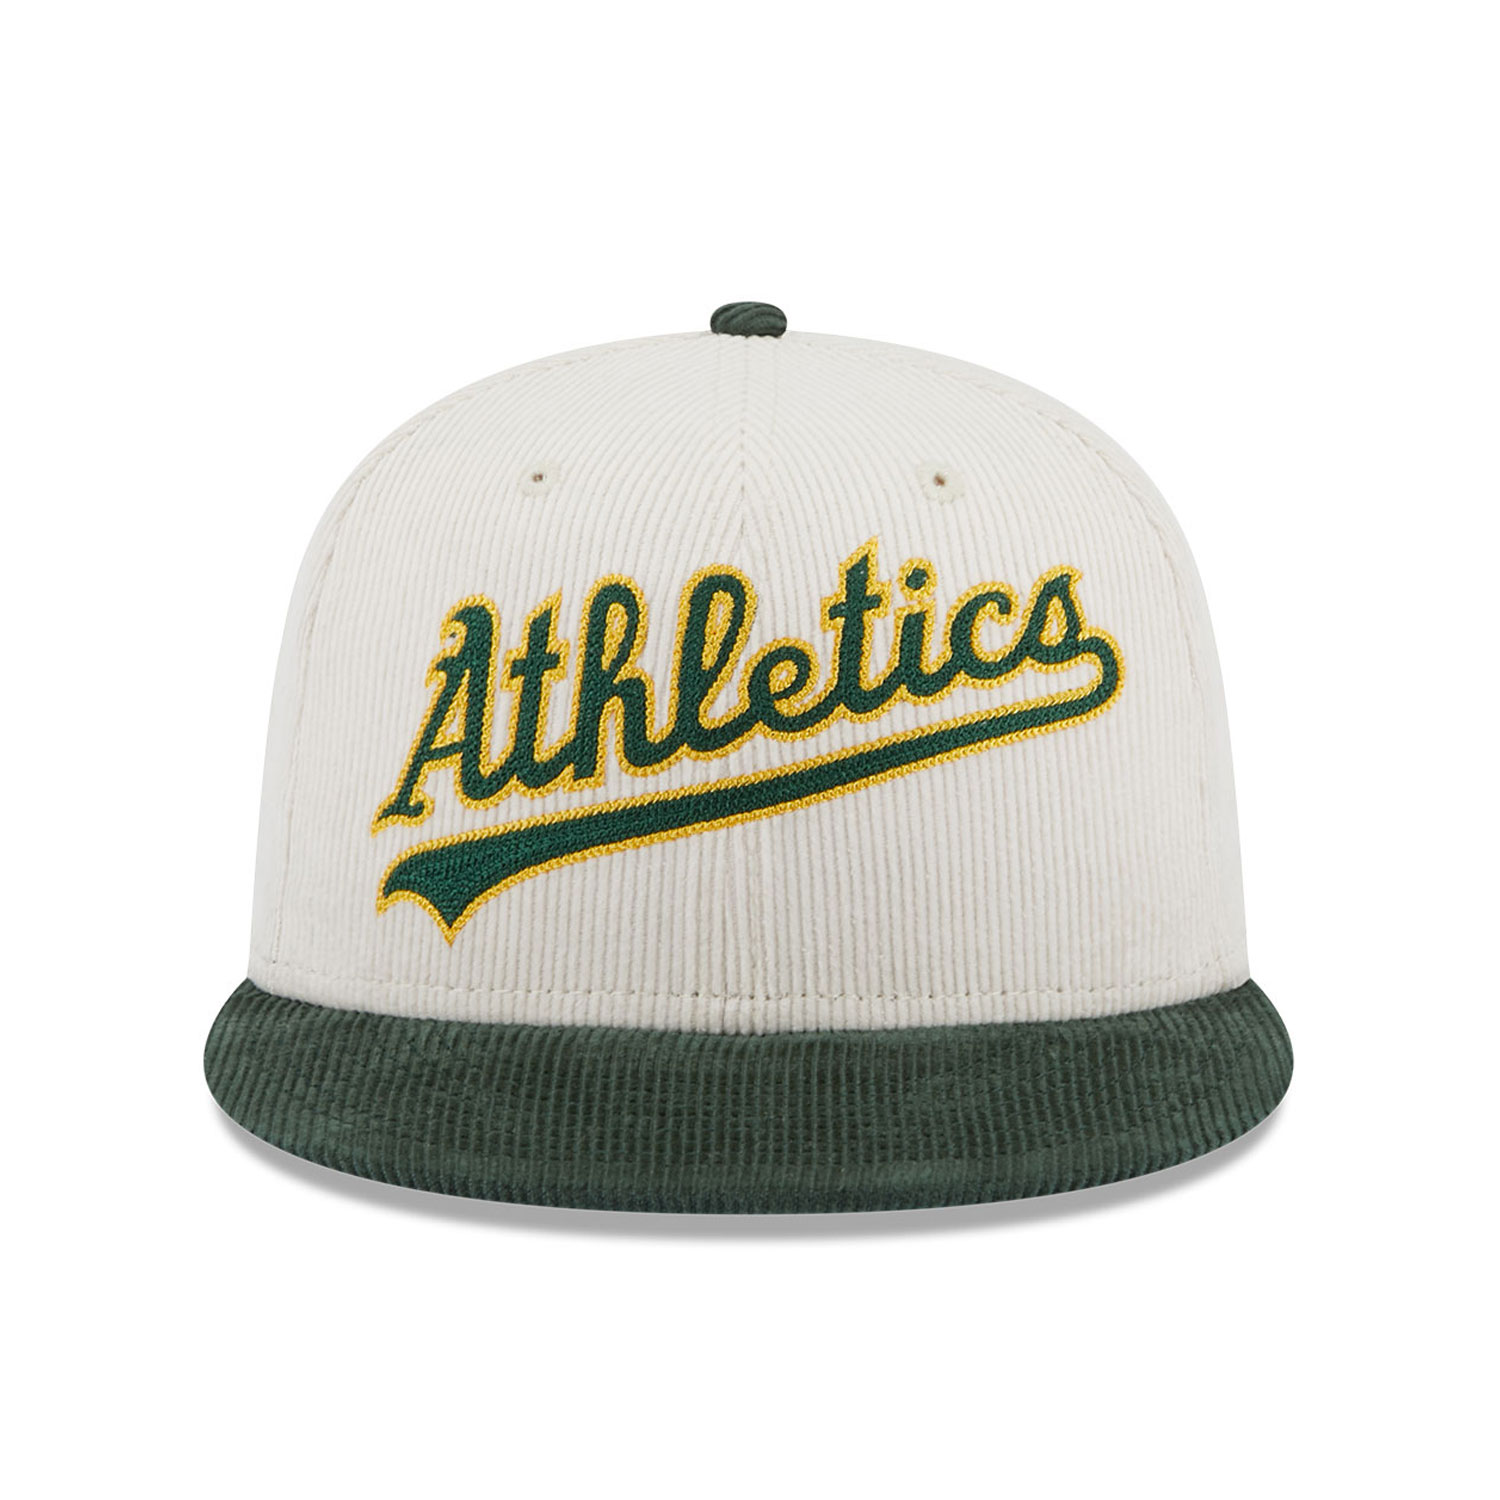 Oakland Athletics Vintage Cord White 59FIFTY Fitted Cap